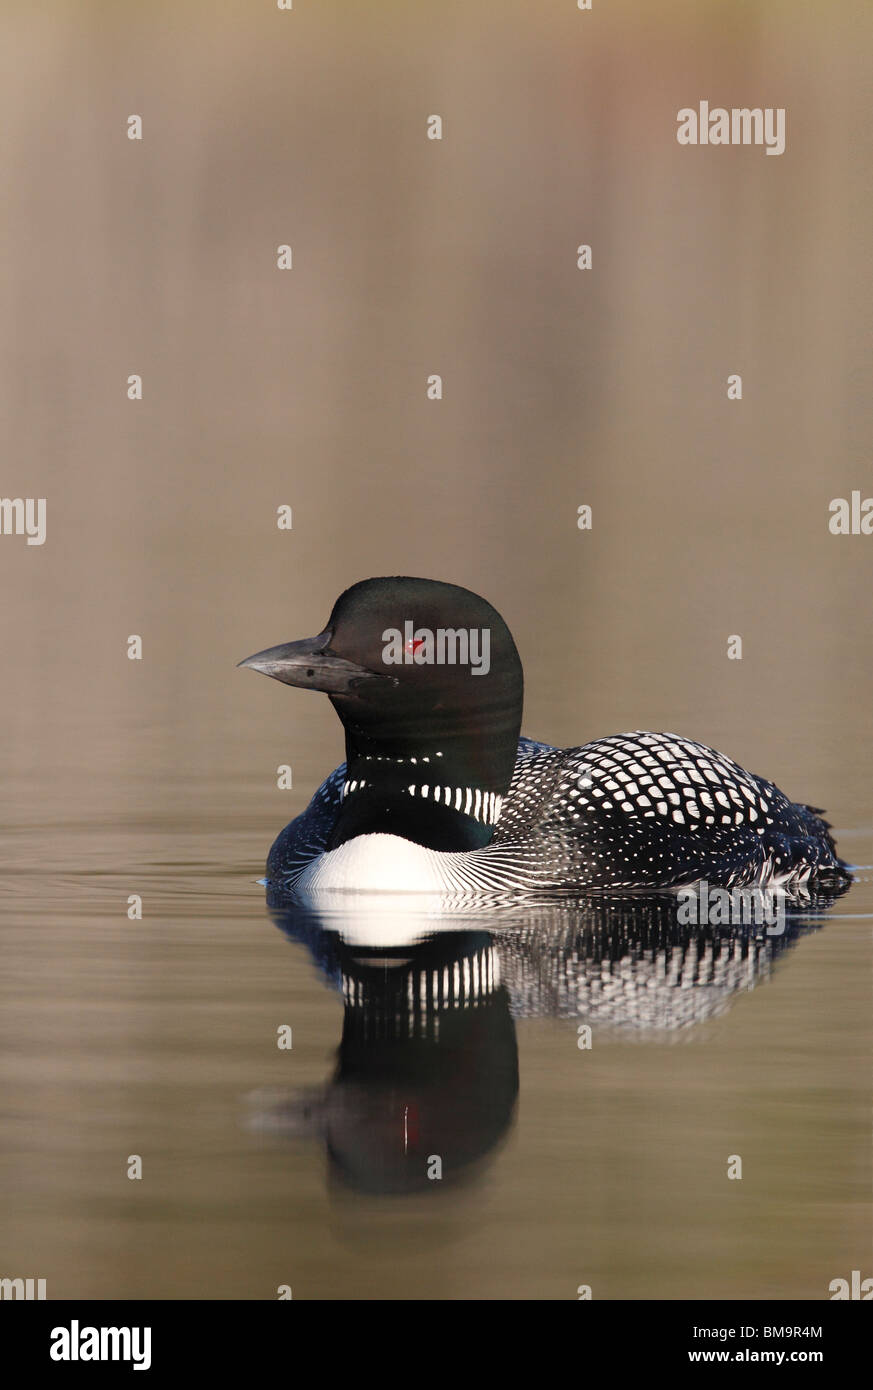 Common Loon, Northern Diver (gavia immer) from Northern Michigan Stock Photo